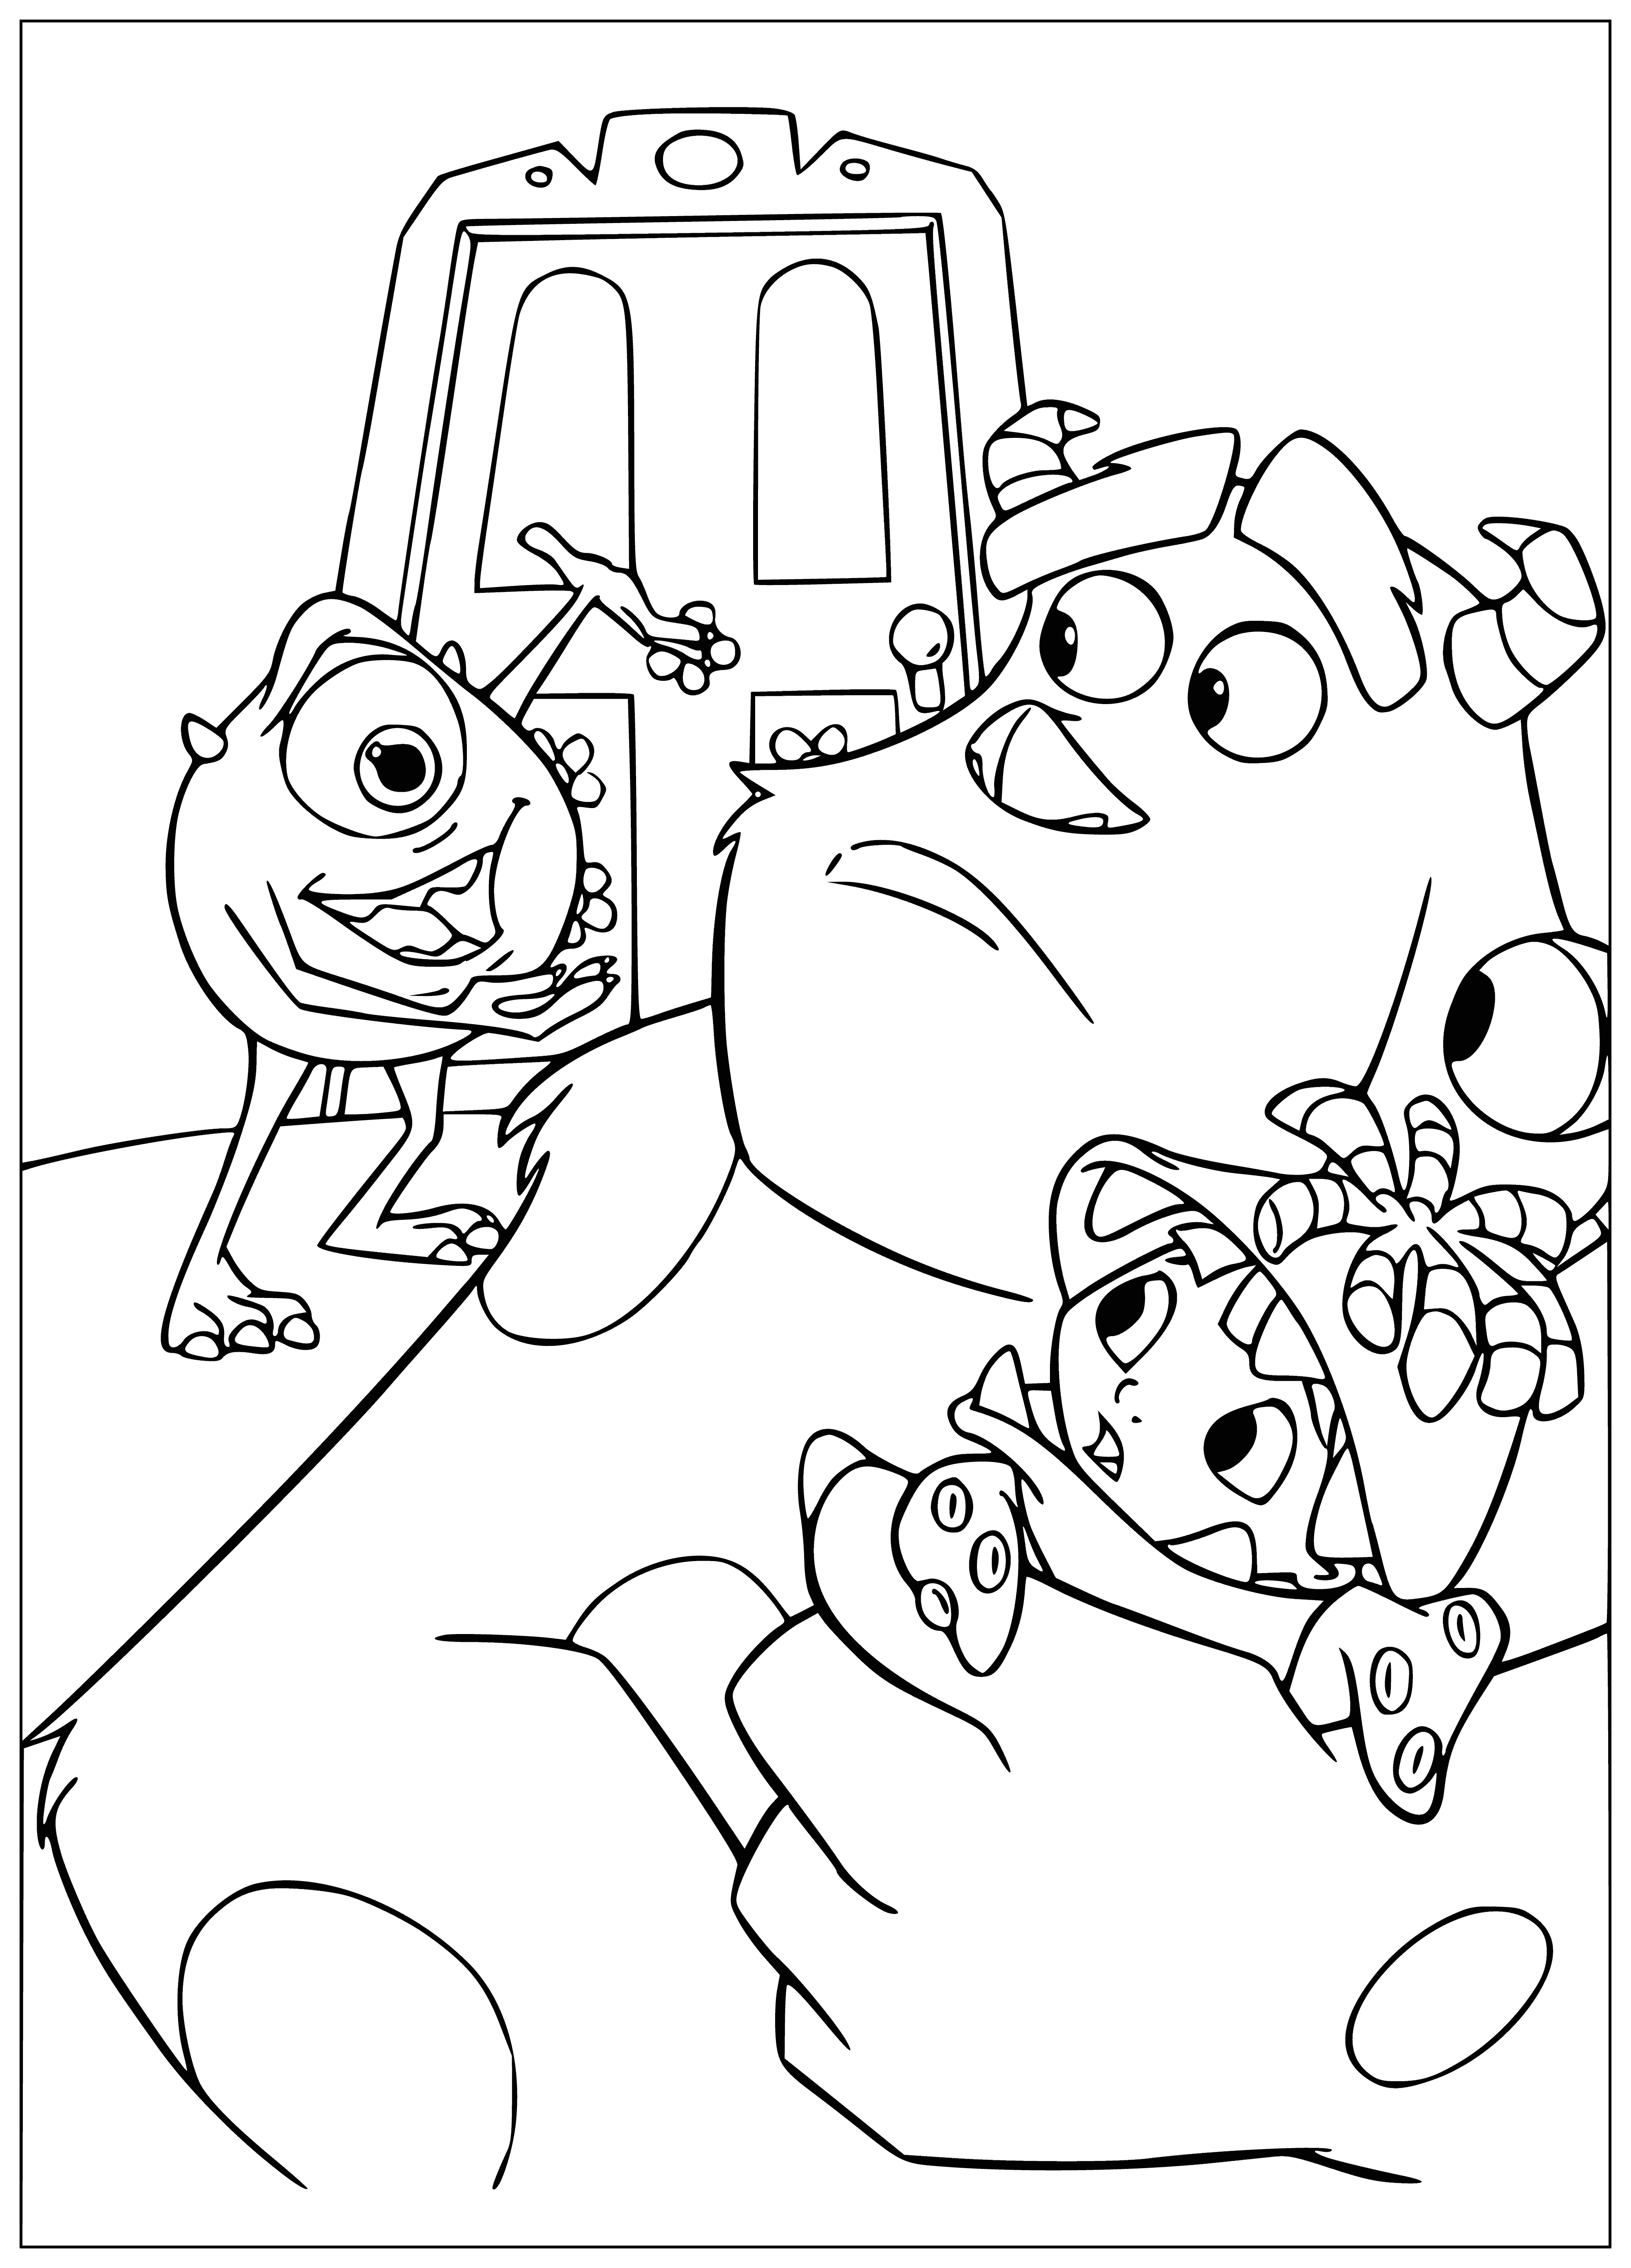 Here it is - the door! coloring page